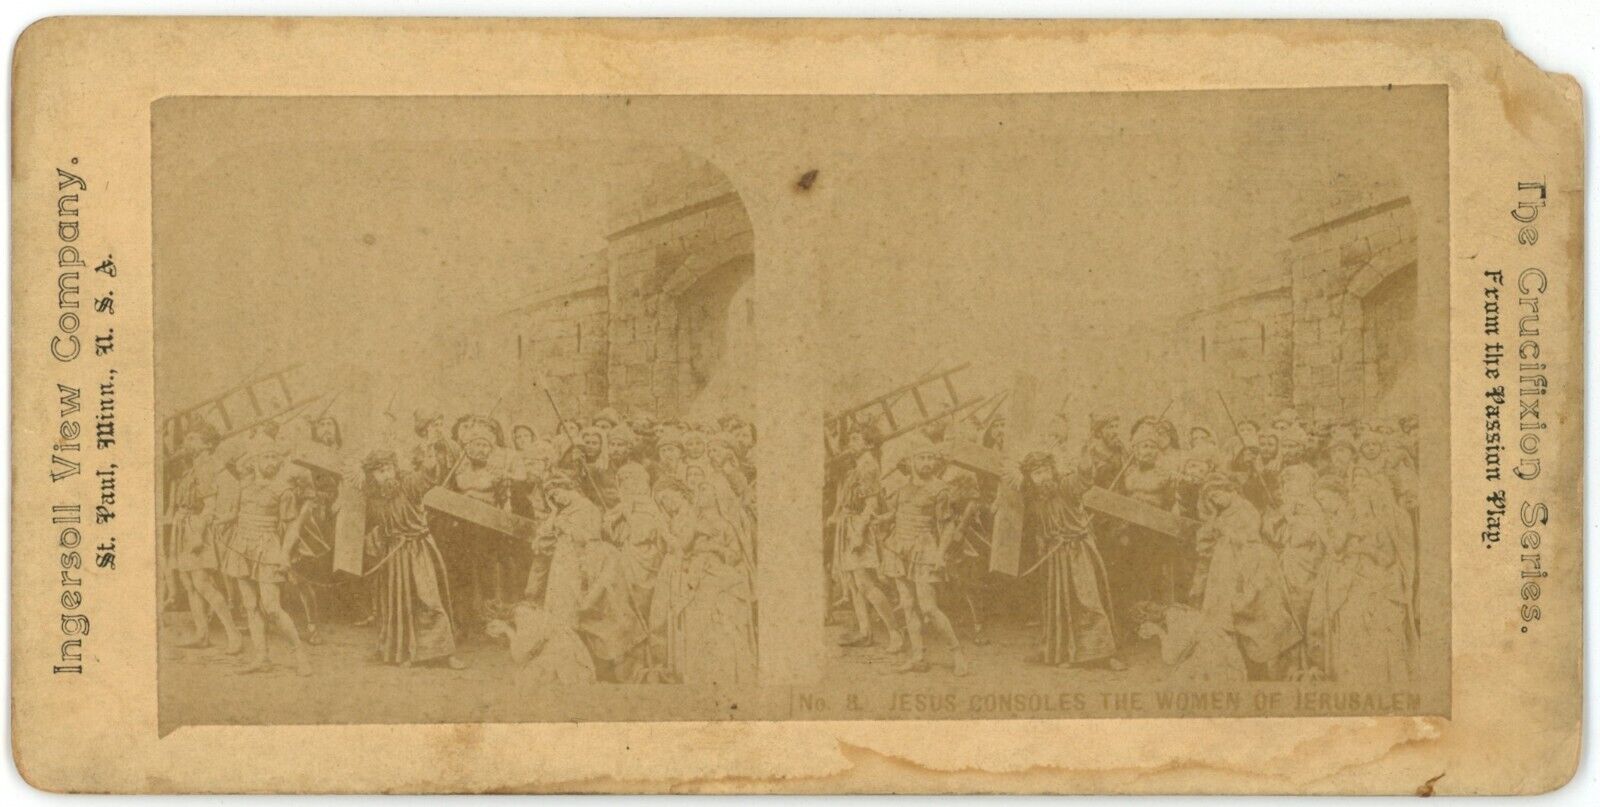 c1890's Real Photo Stereoview Card Jesus Consoles The Women of Jerusalem